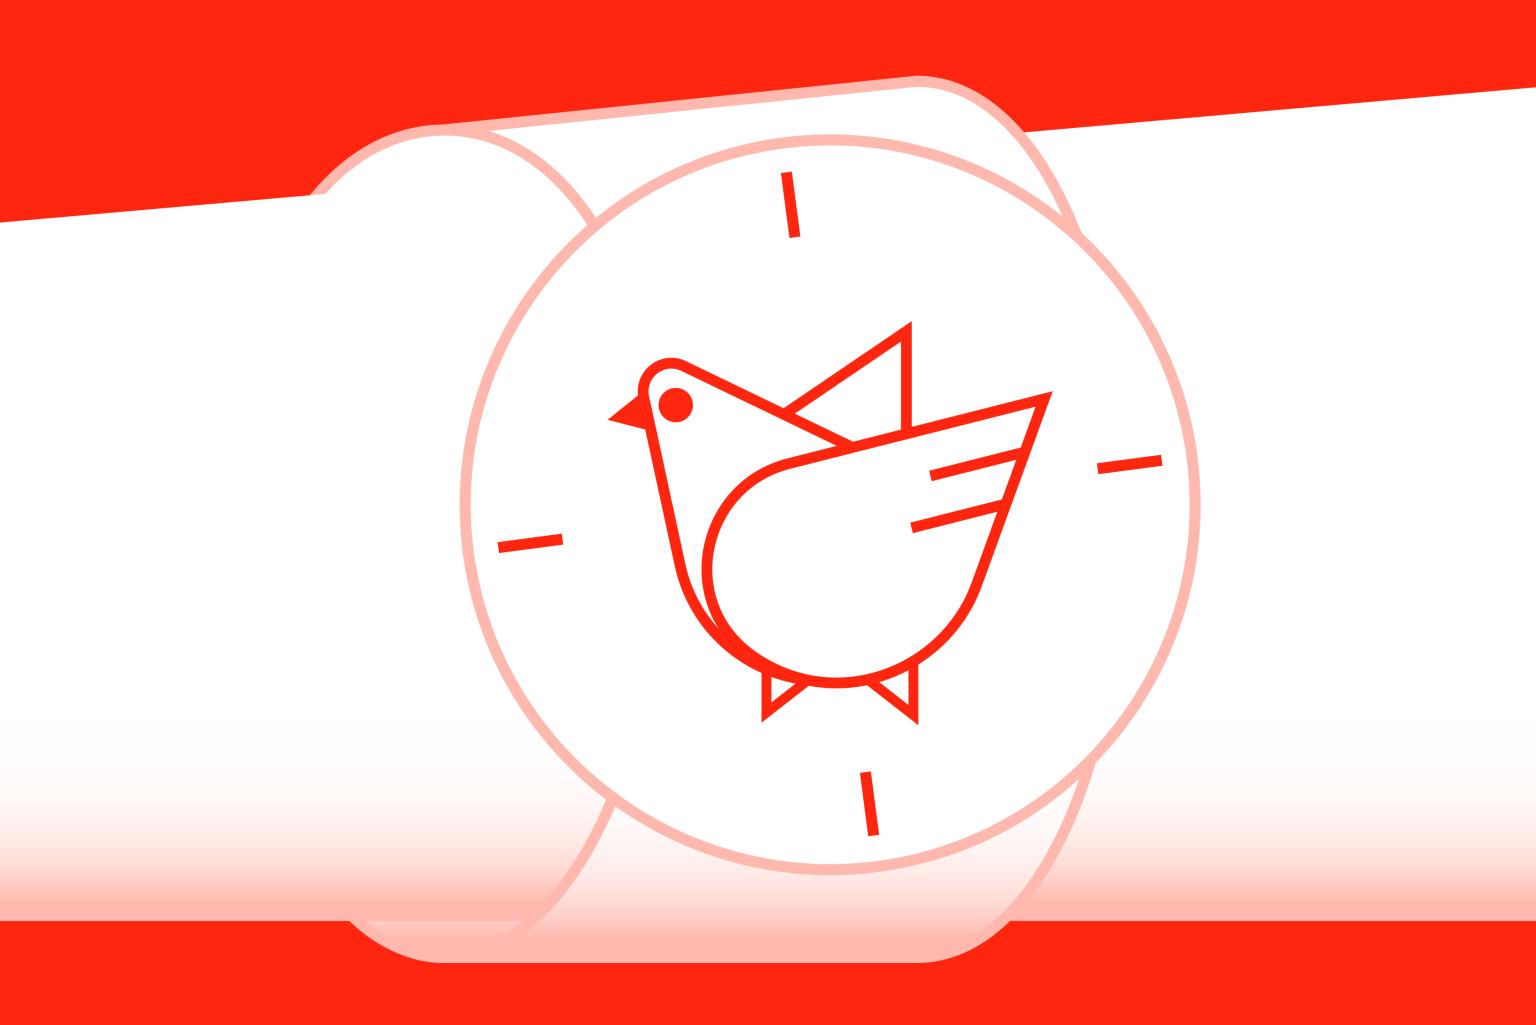 Illustration of a wrist watch. Instead of clock hands there is a white dove in the watch centre.